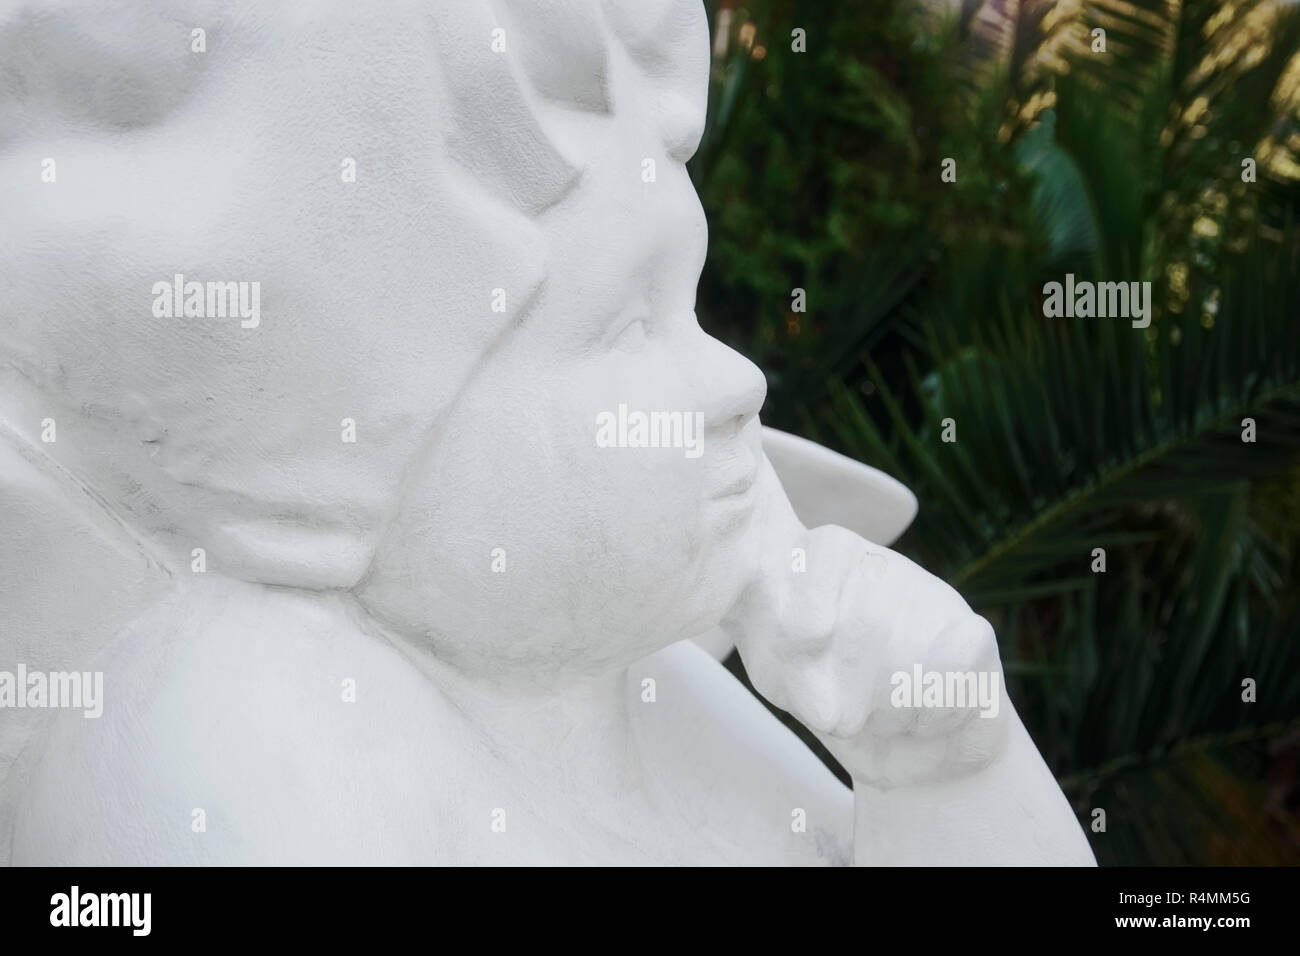 White statue of the angel against the background of palm trees Stock Photo